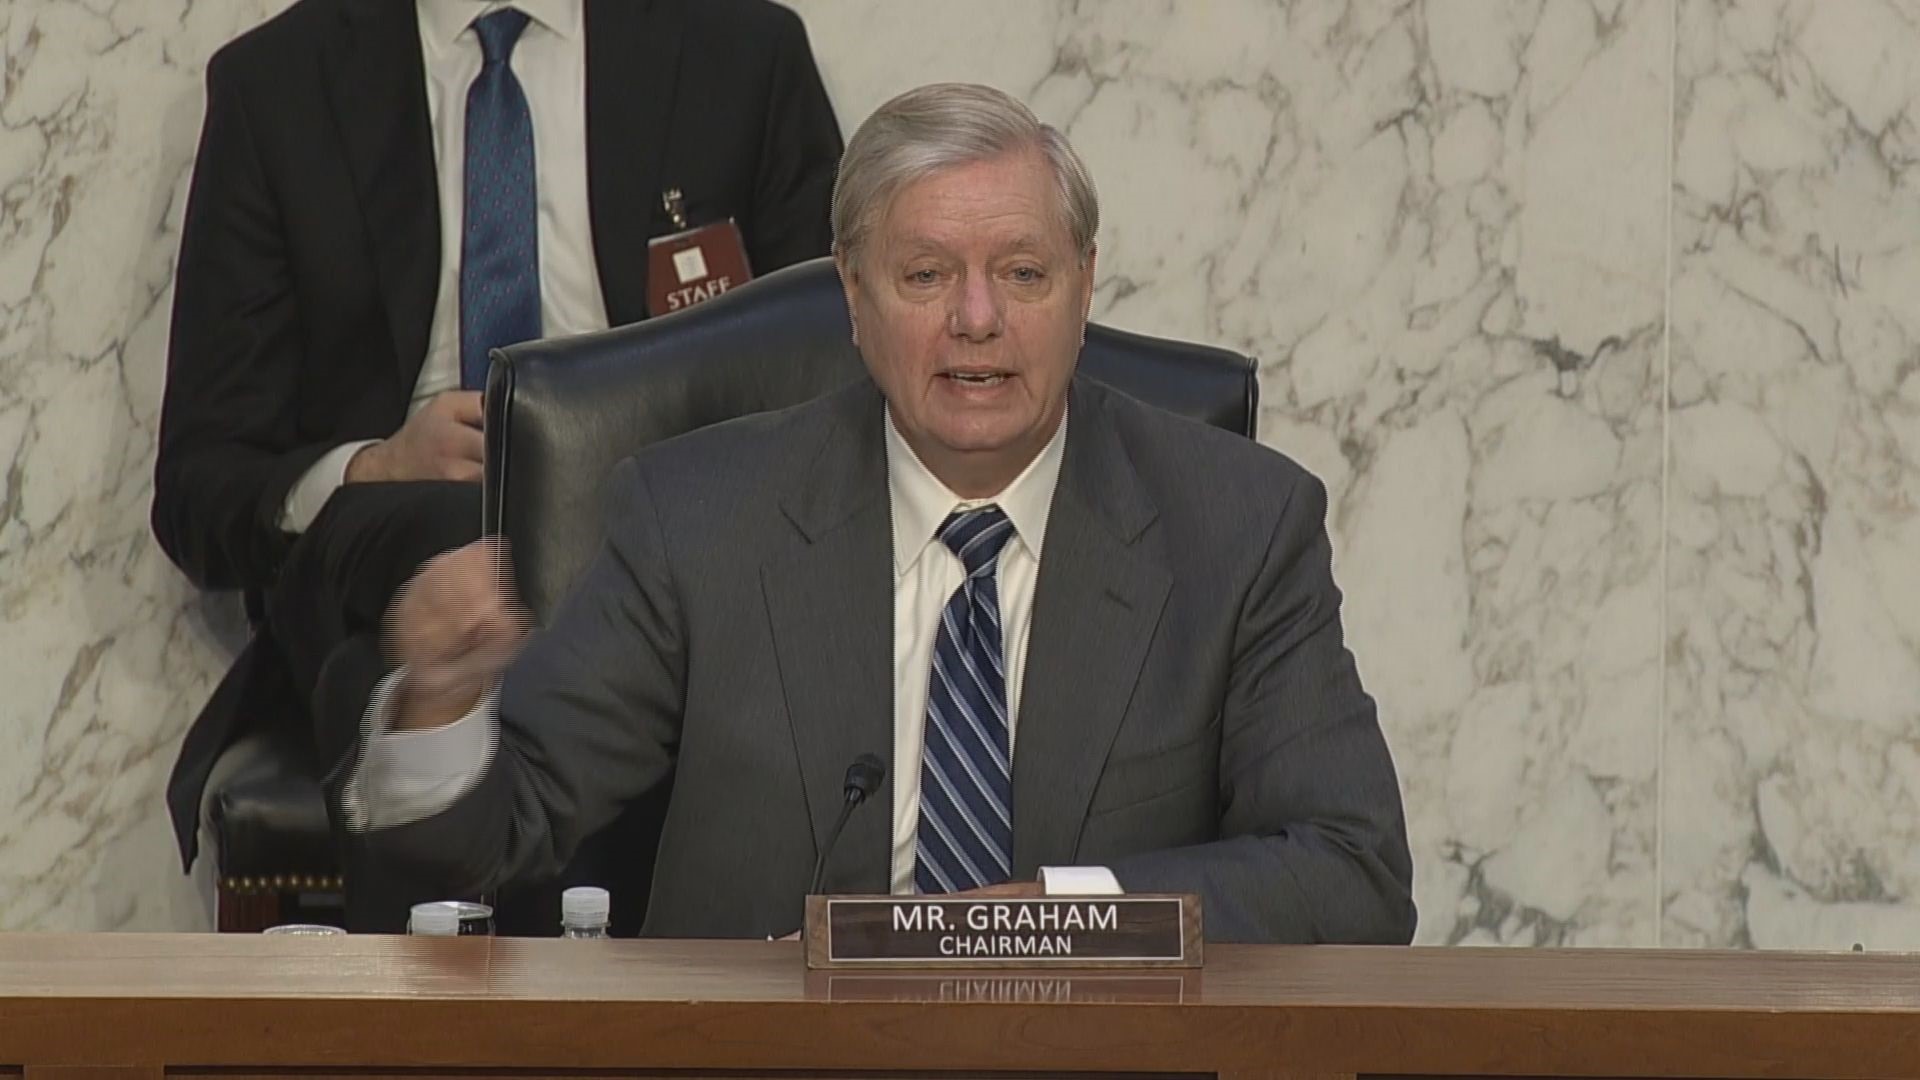 In a senate hearing, Graham referenced the "good old days of segregation." He later told reporters it was sarcasm.